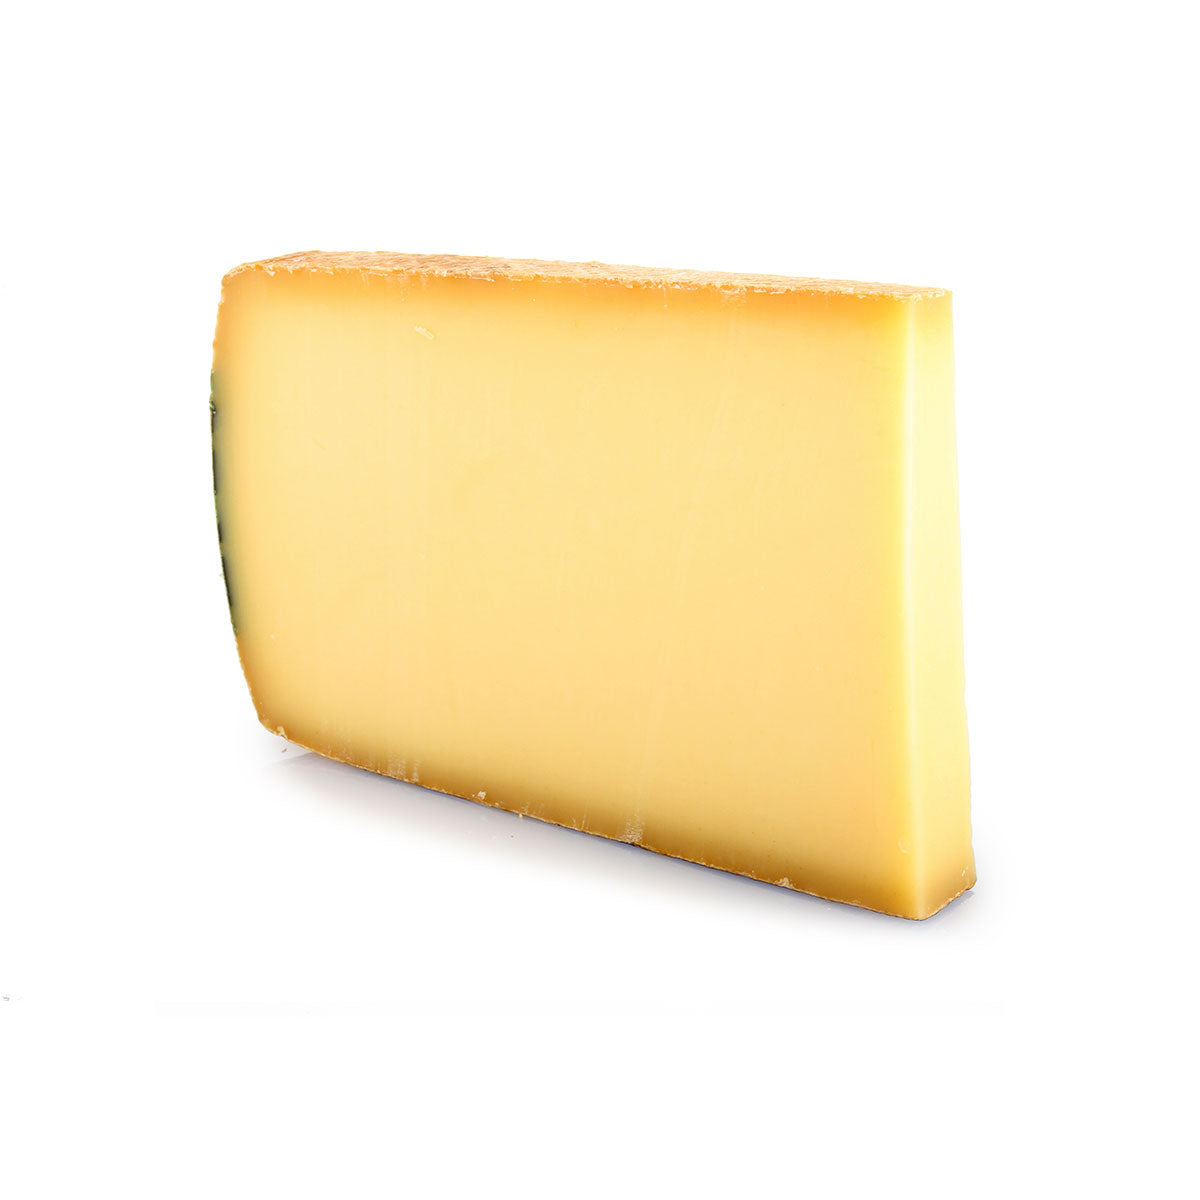 Murray'S Cheese 18 Months Aged Comte Cheese